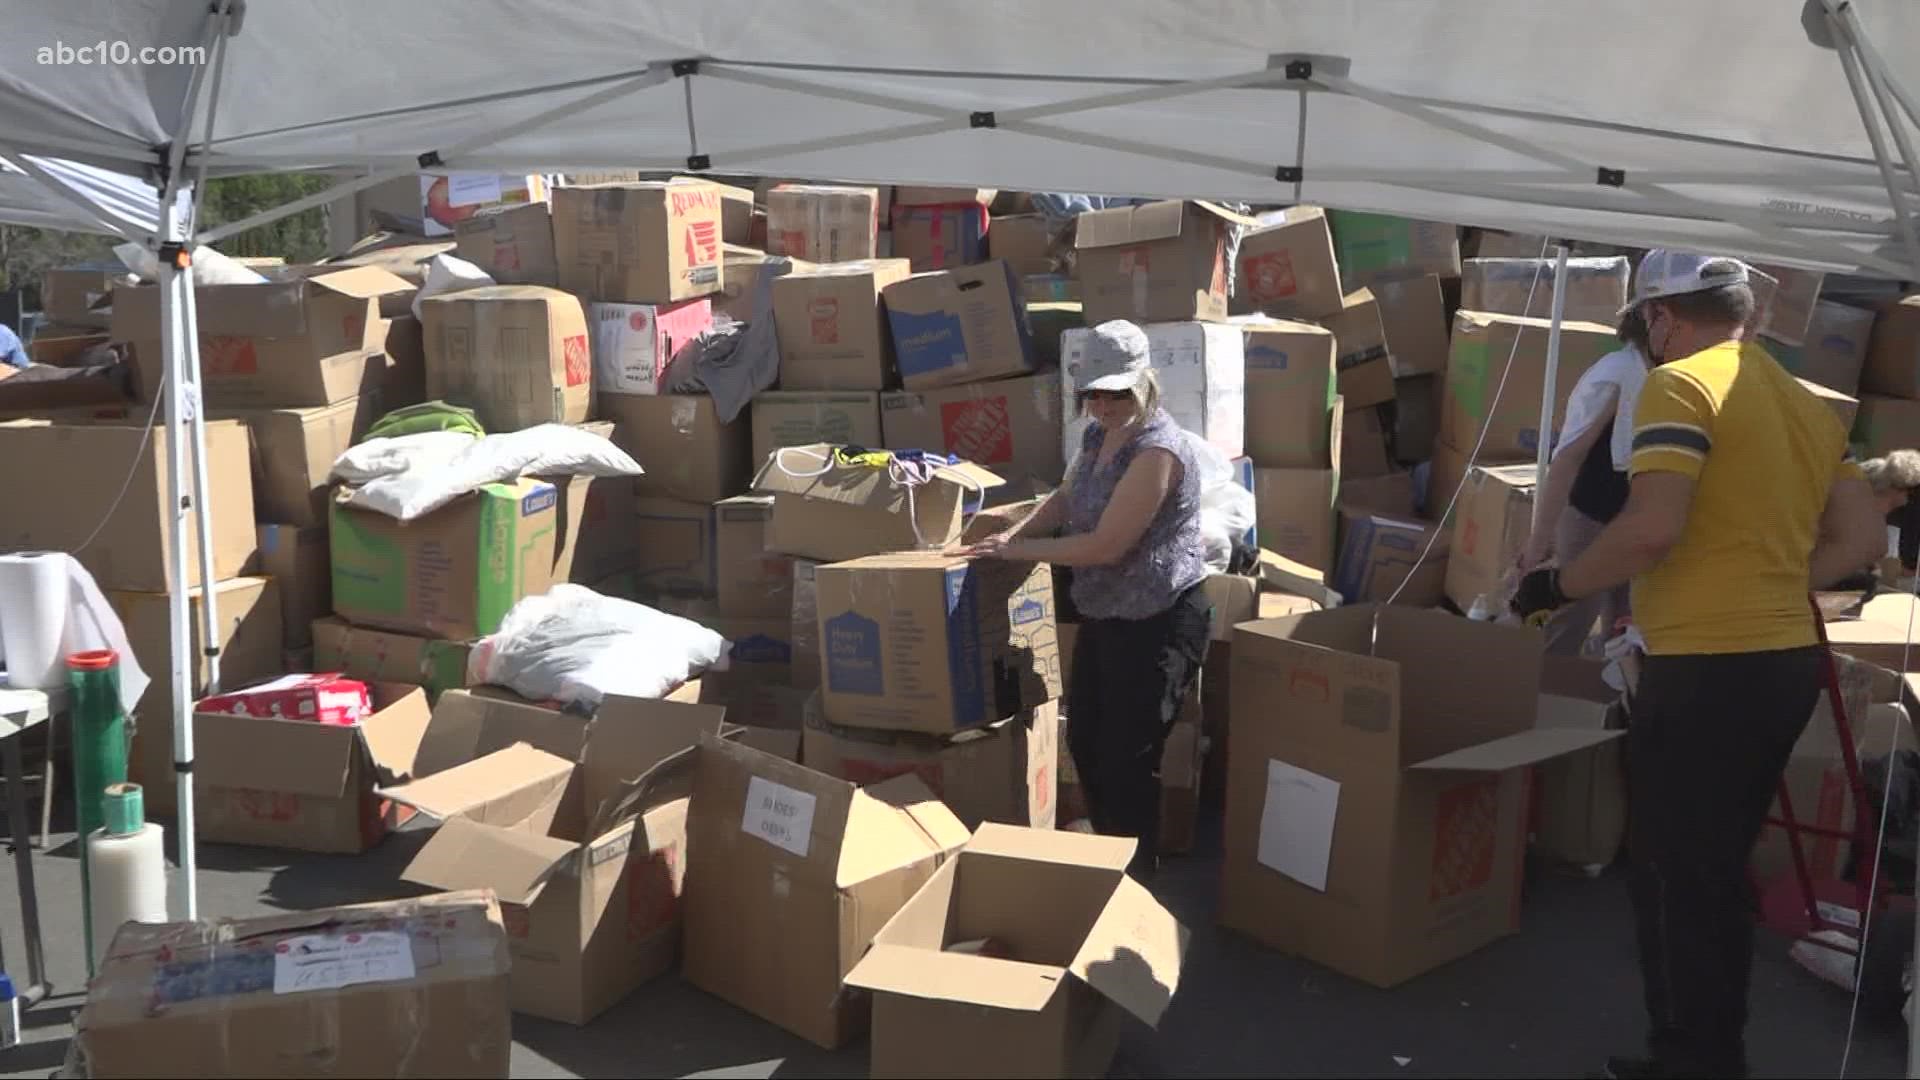 An Orangevale church partnered with a non-profit called "Convoy of Hope" to send humanitarian supplies to Ukraine.